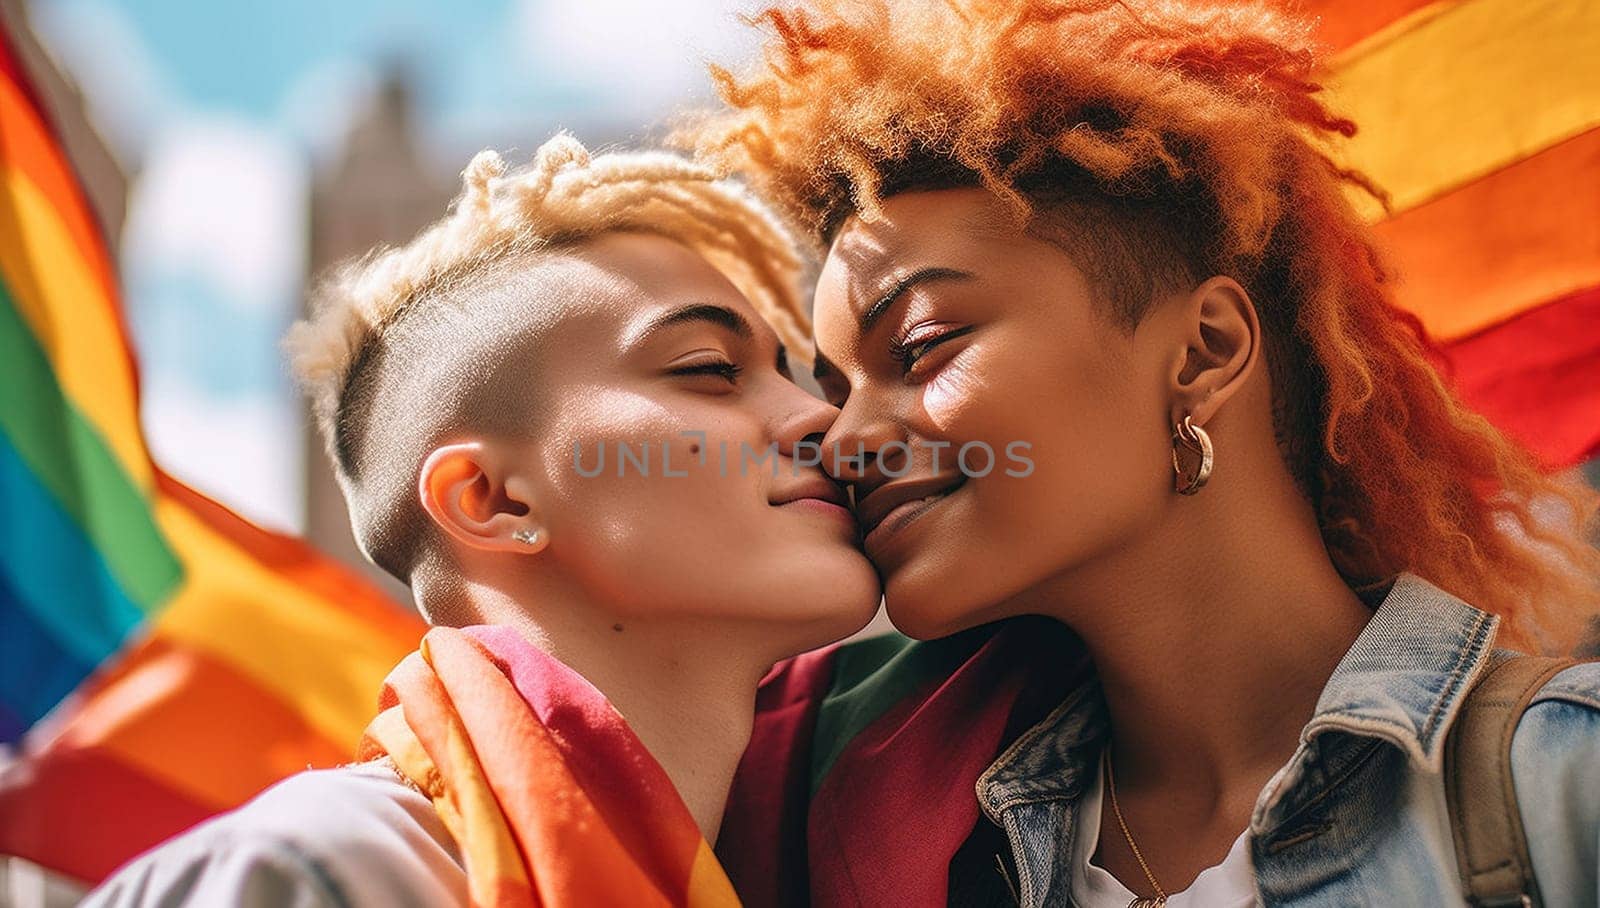 Portrait of young gay,lesbian couple embracing and showing their love with rainbow flag at the street. LGBTQ and love concept. by Annebel146